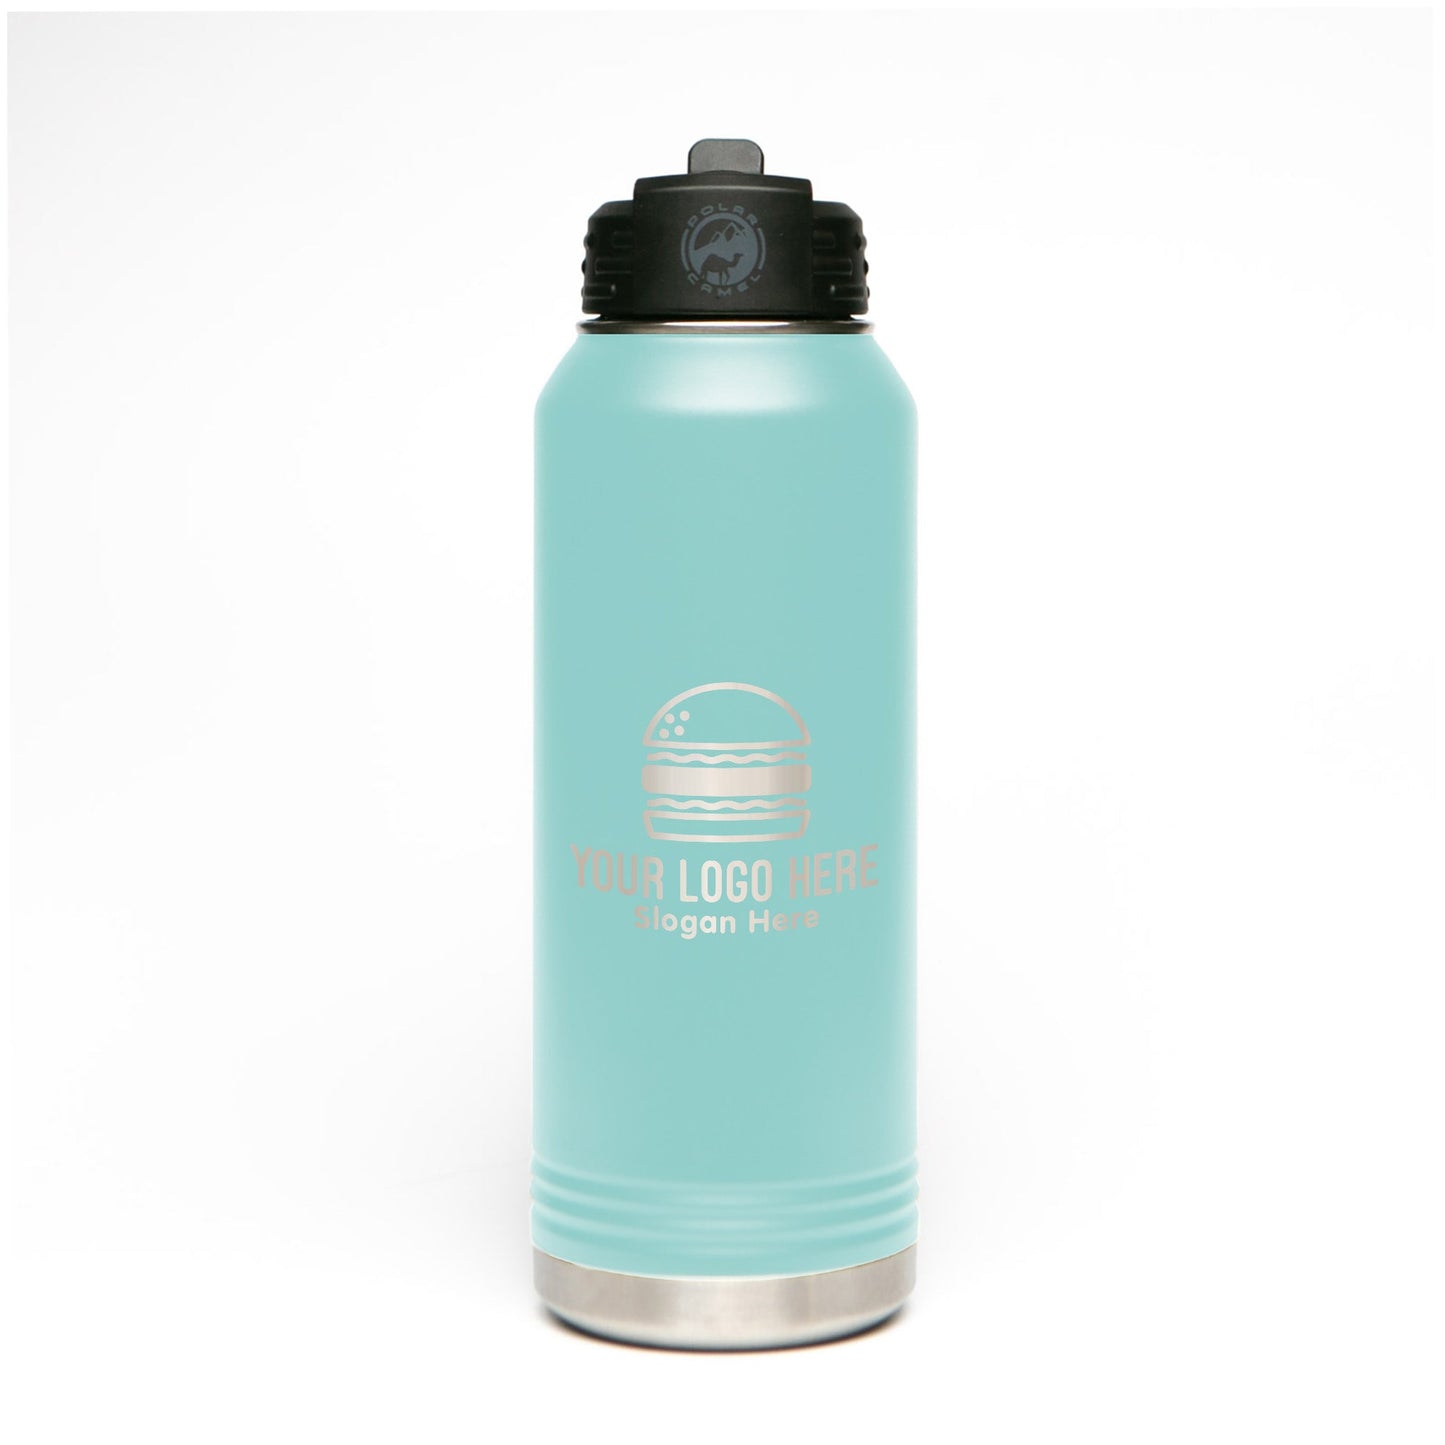 Wholesale Customized 32oz Wide Mouth Water Bottle - Etchified-etchified-WH_LWB206